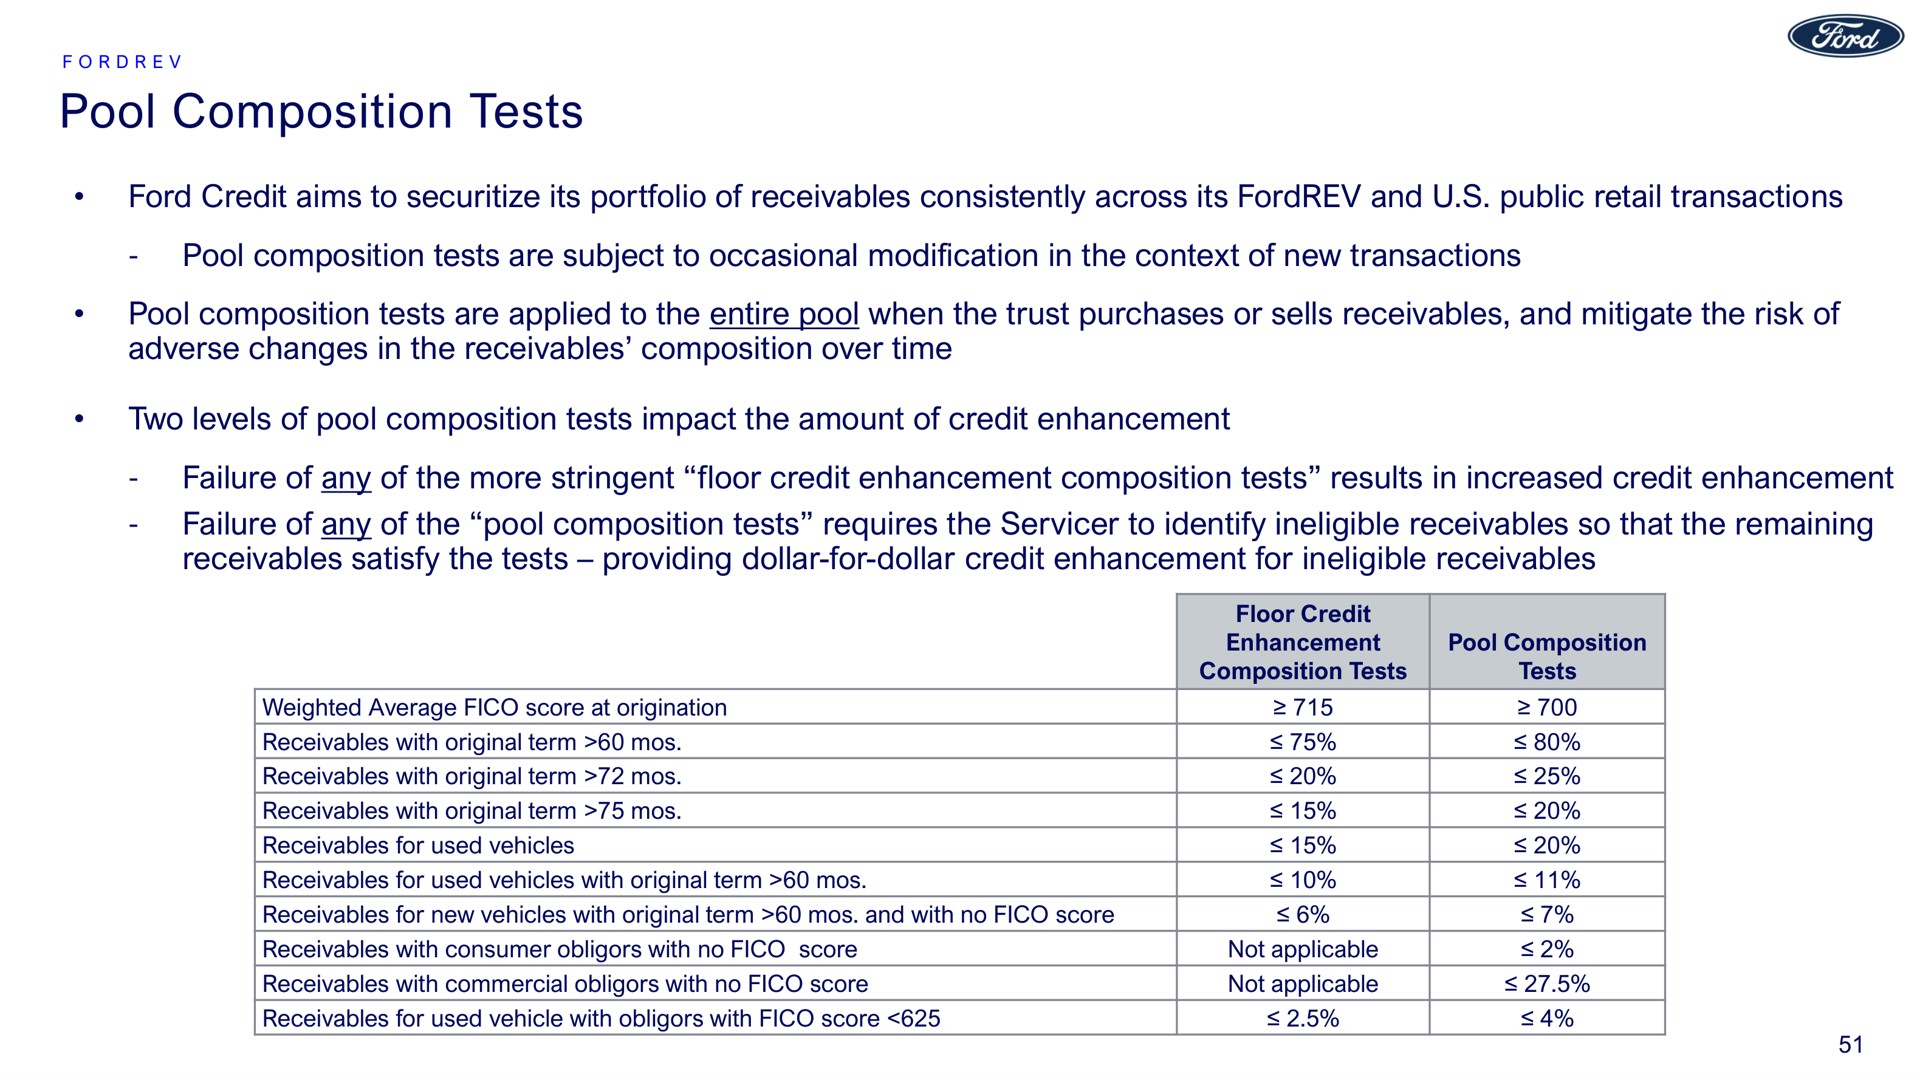 pool composition tests ford credit aims to its portfolio of receivables consistently across its and public retail transactions pool composition tests are subject to occasional modification in the context of new transactions pool composition tests are applied to the entire pool when the trust purchases or sells receivables and mitigate the risk of adverse changes in the receivables composition over time two levels of pool composition tests impact the amount of credit enhancement failure of any of the more stringent floor credit enhancement composition tests results in increased credit enhancement failure of any of the pool composition tests requires the to identify ineligible receivables so that the remaining receivables satisfy the tests providing dollar for dollar credit enhancement for ineligible receivables | Ford